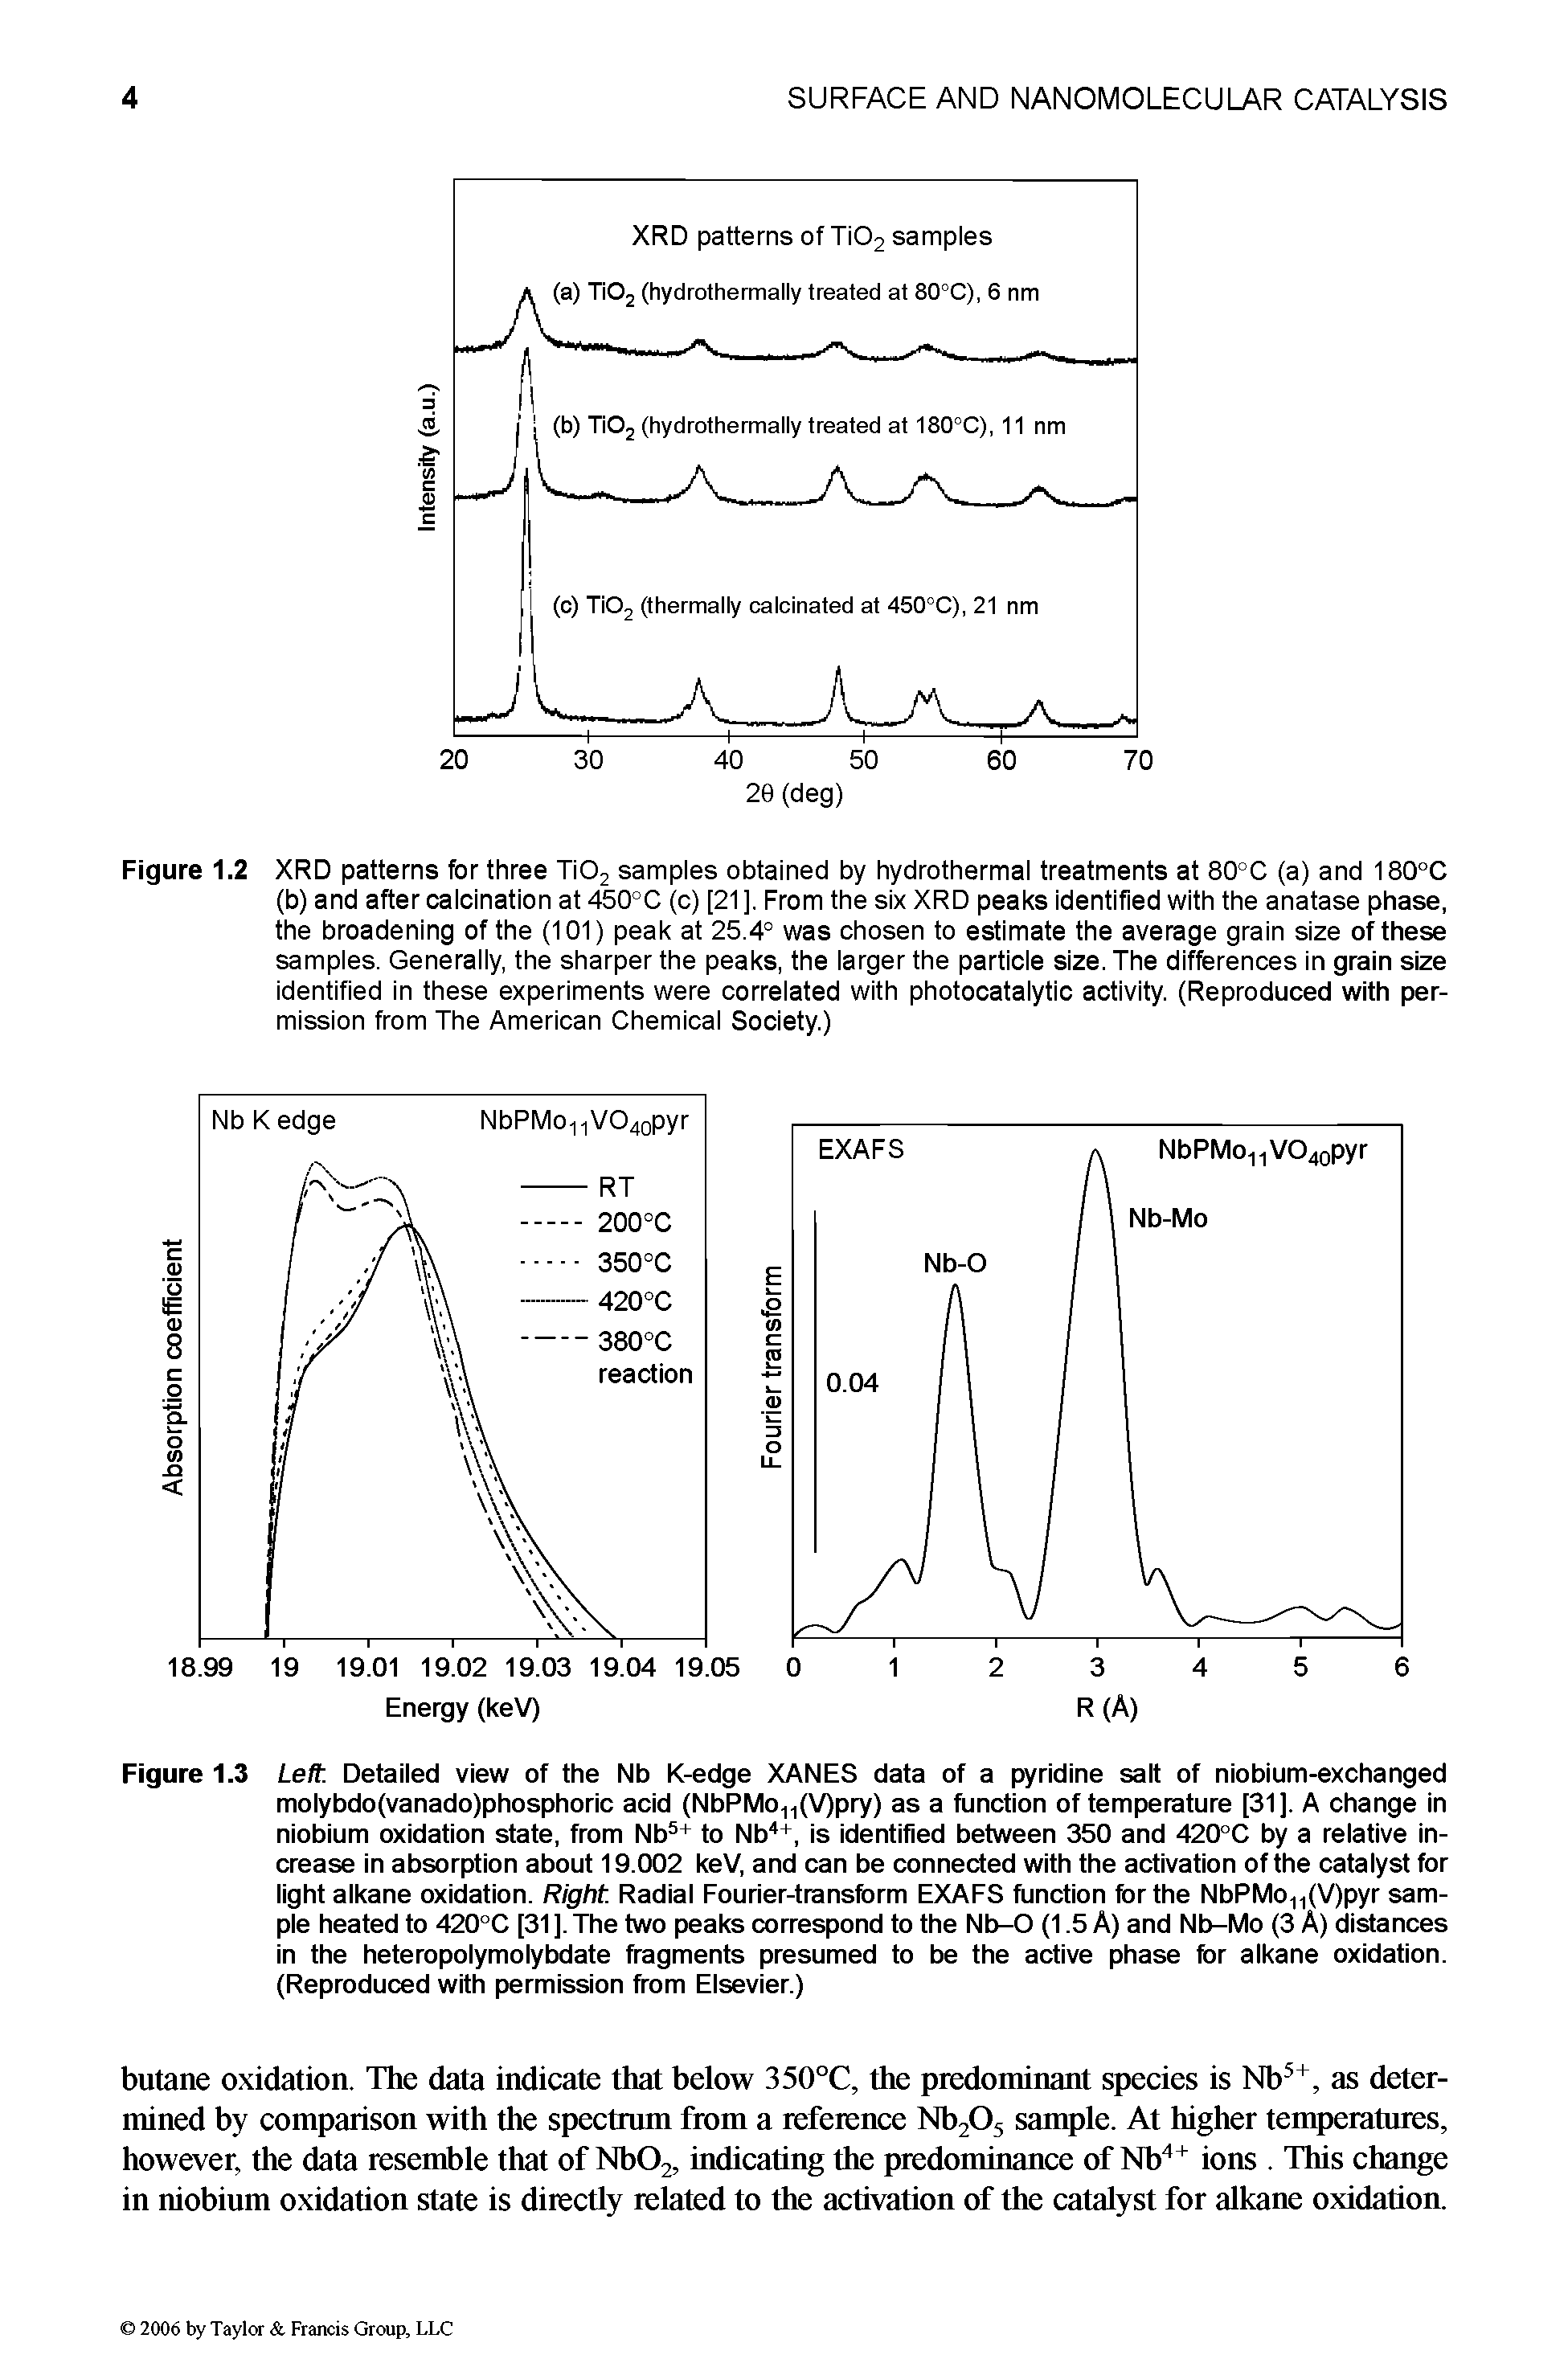 Figure 1.3 Left. Detailed view of the Nb K-edge XANES data of a pyridine salt of niobium-exchanged molybdo(vanado)phosphoric acid (NbPMo fVJpry) as a function of temperature [31]. A change in niobium oxidation state, from Nb5+ to Nb4+, is identified between 350 and 420°C by a relative increase in absorption about 19.002 keV, and can be connected with the activation of the catalyst for light alkane oxidation. Right. Radial Fourier-transform EXAFS function for the NbPMo (V)pyr sample heated to 420°C [31 ]. The two peaks correspond to the Nb-O (1.5 A) and Nb-Mo (3 A) distances in the heteropolymolybdate fragments presumed to be the active phase for alkane oxidation. (Reproduced with permission from Elsevier.)...